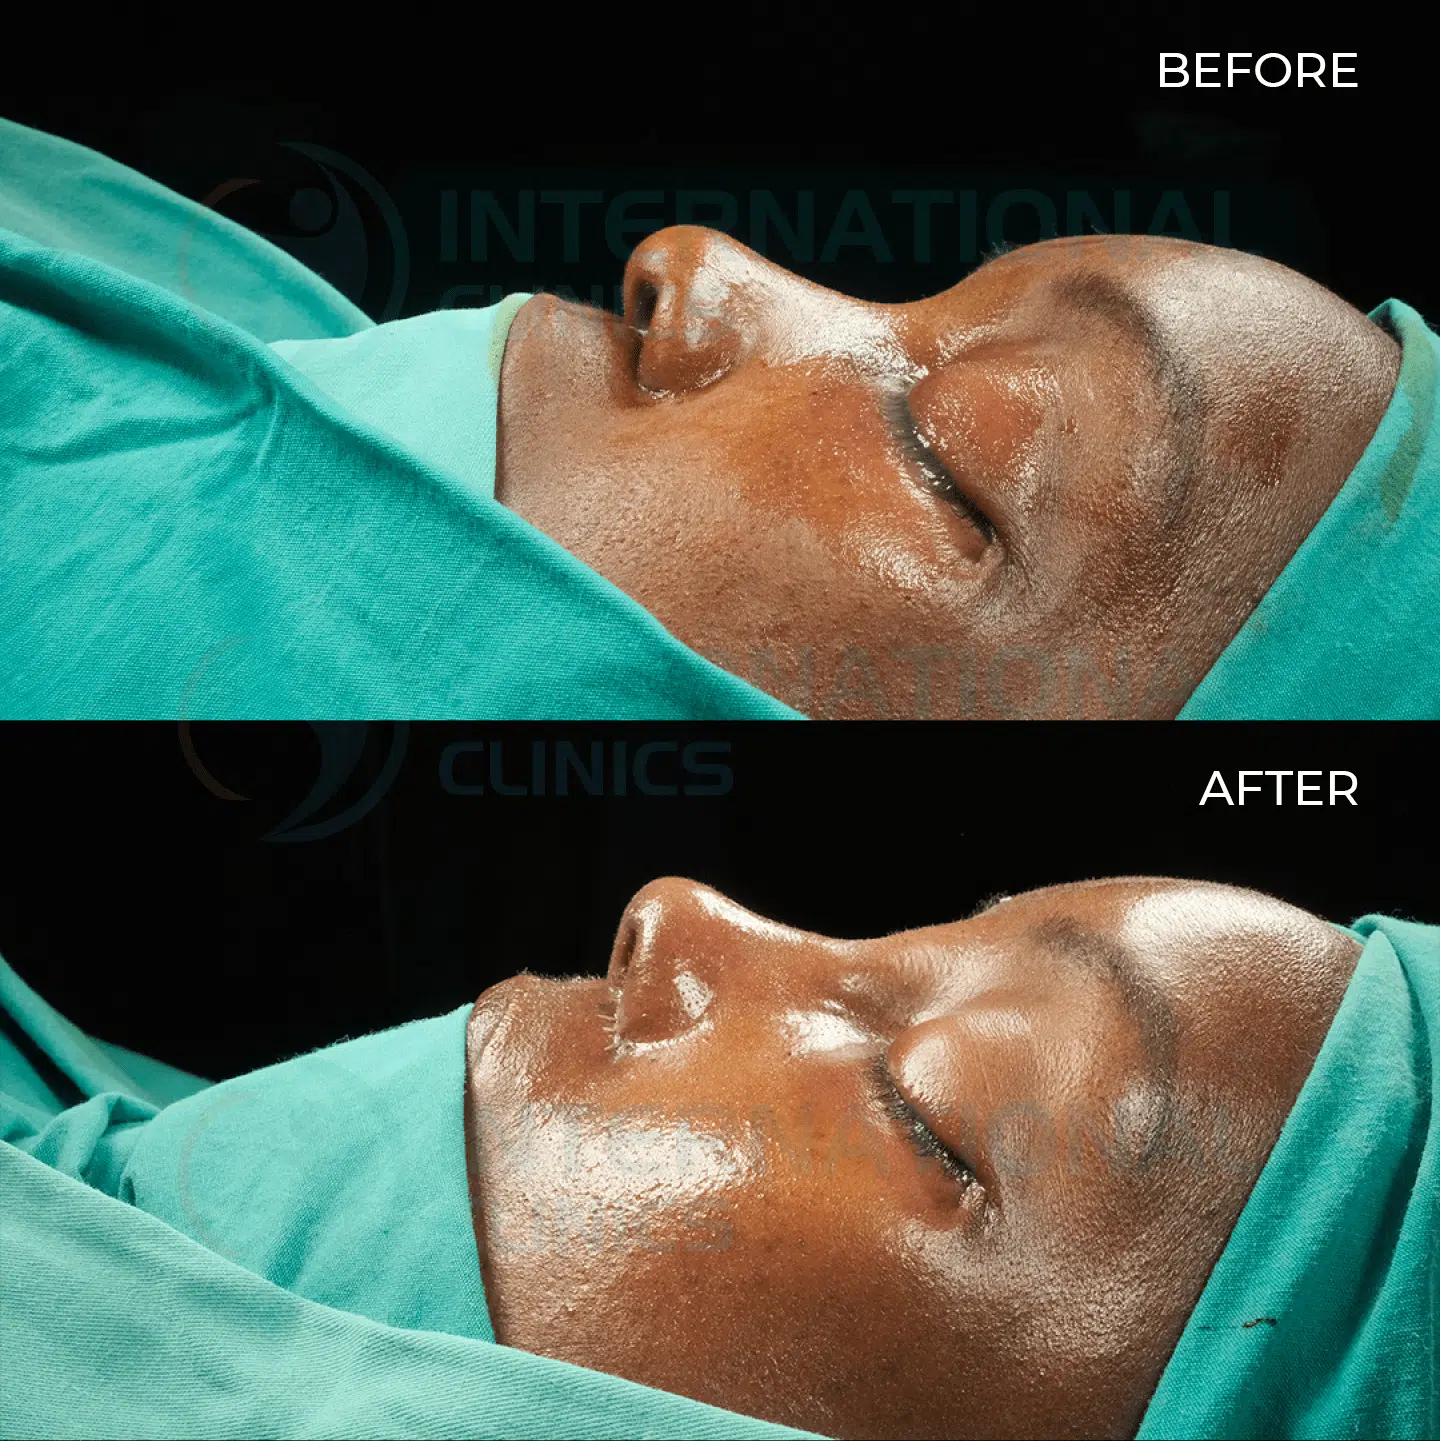 Ethnic Rhinoplasty Before and After image